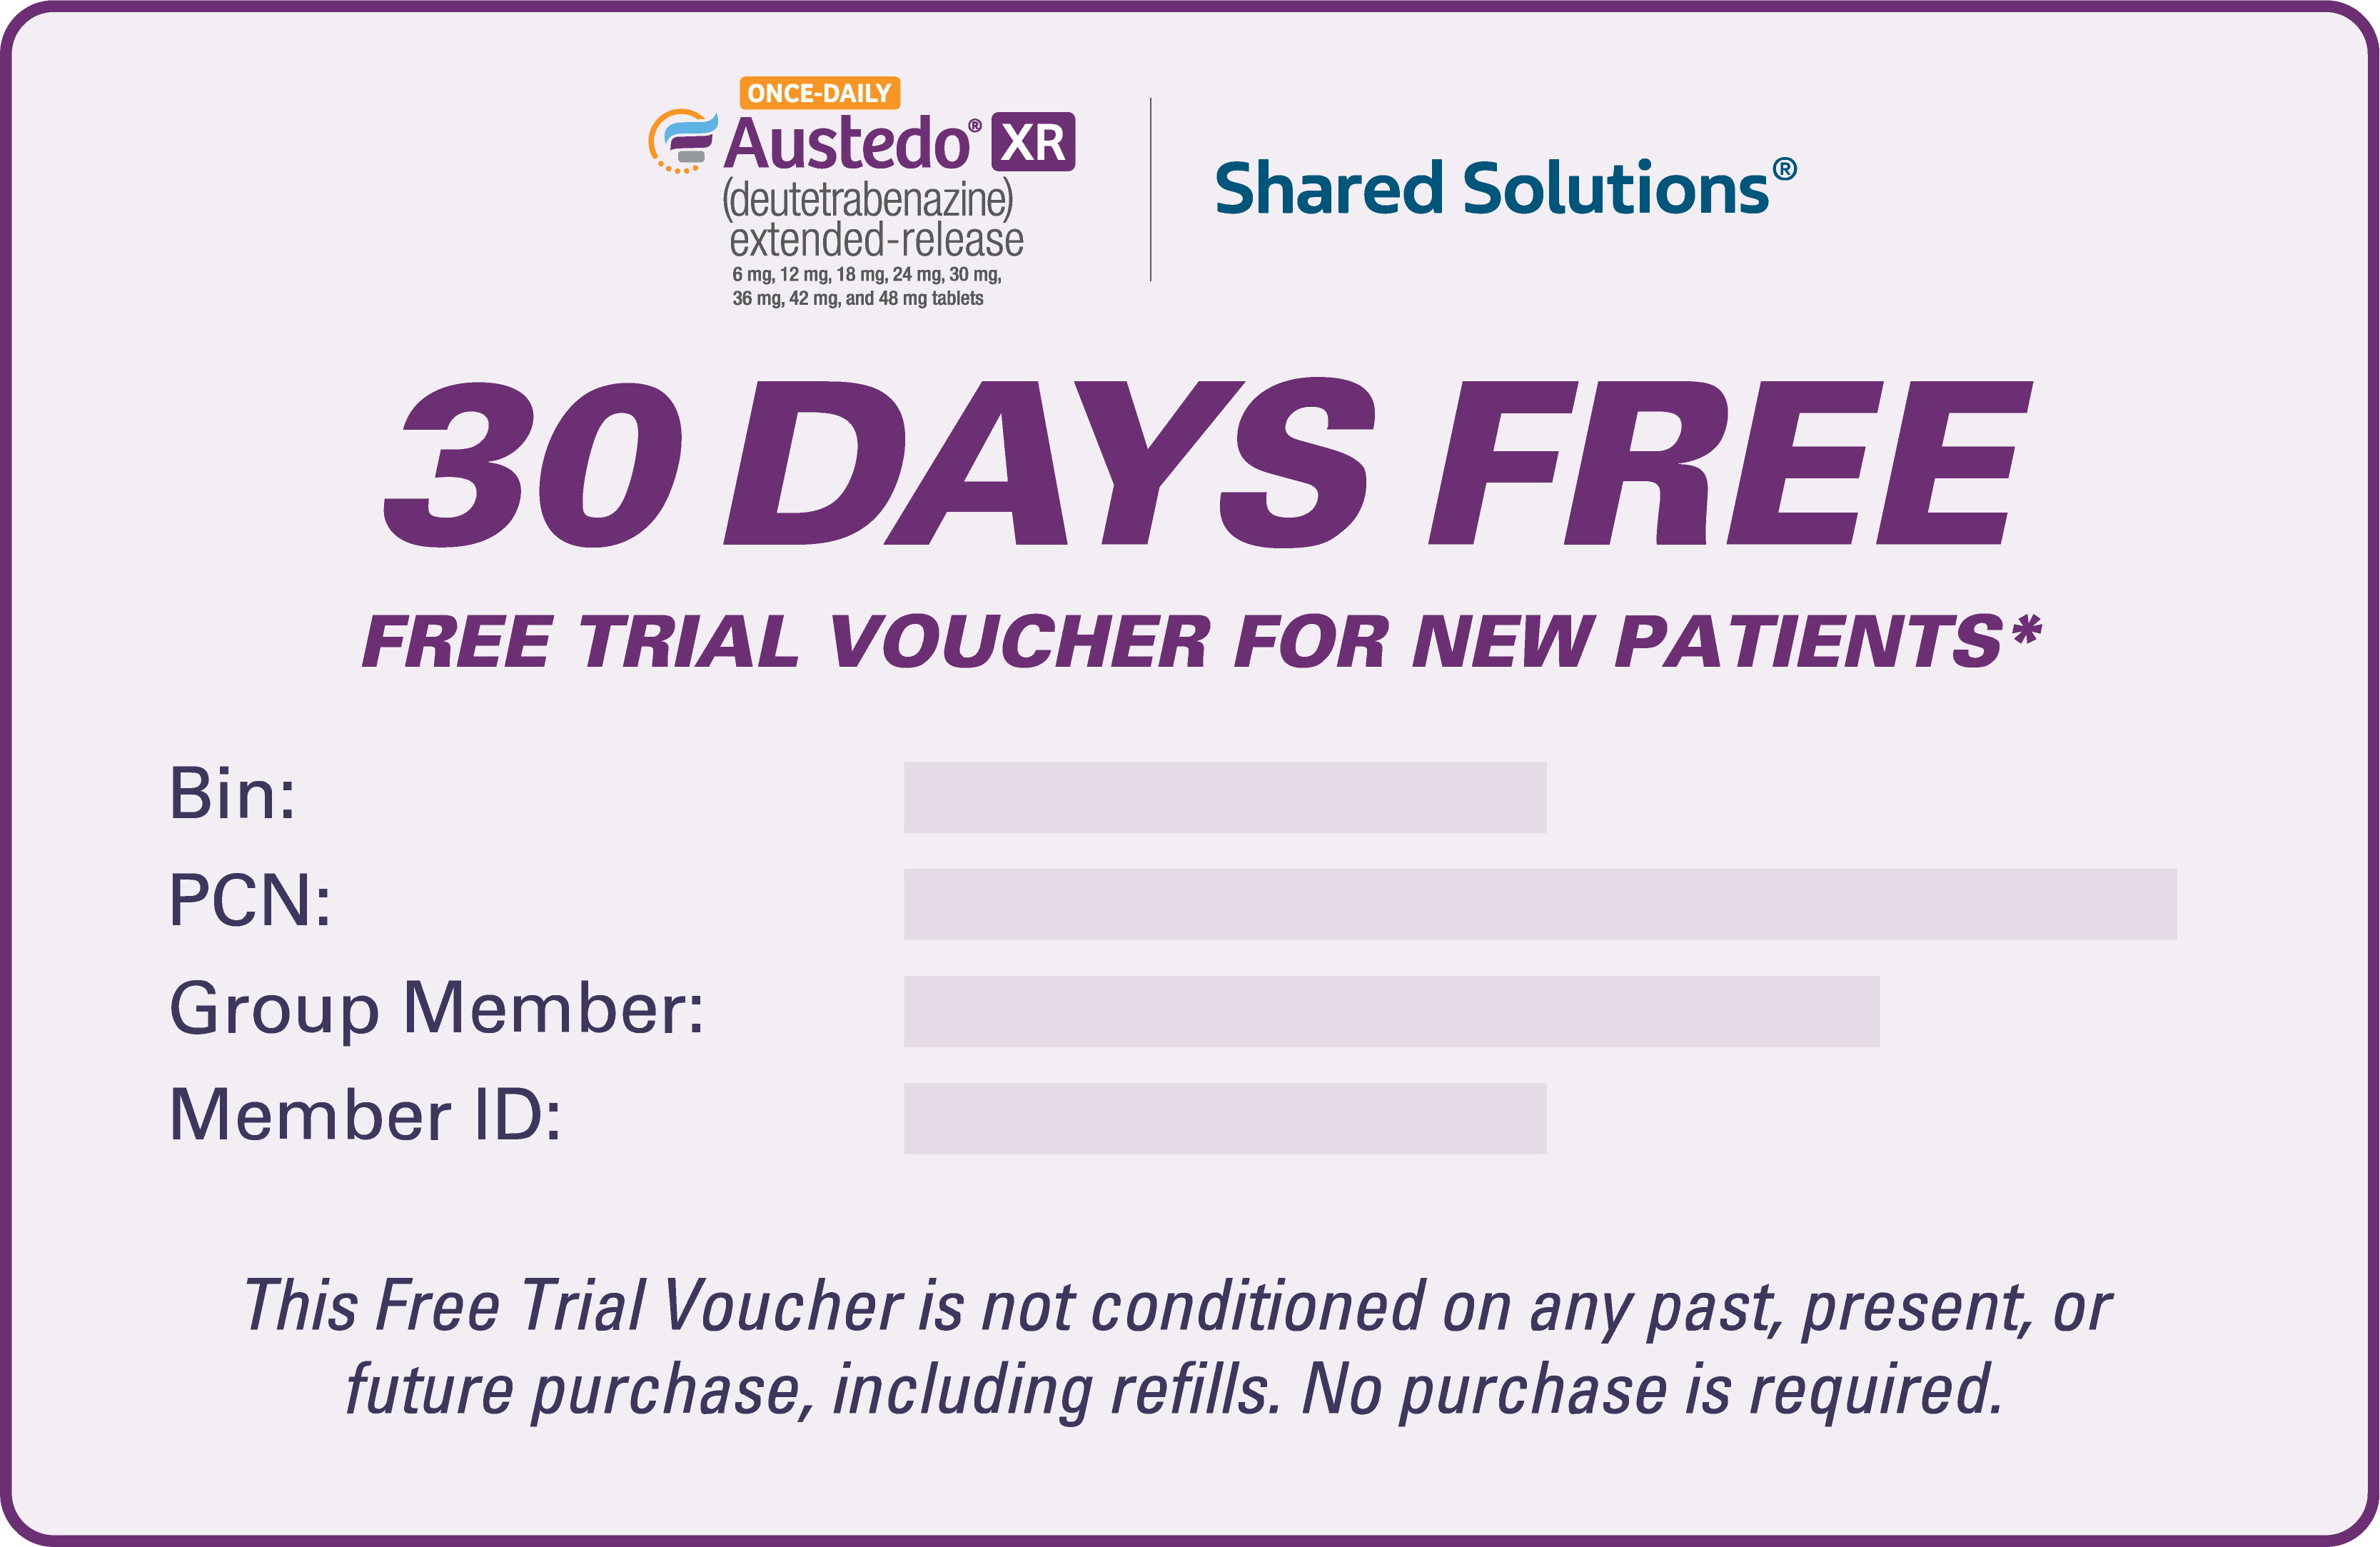 30 days free trial voucher for new patients and $0 copay per month.